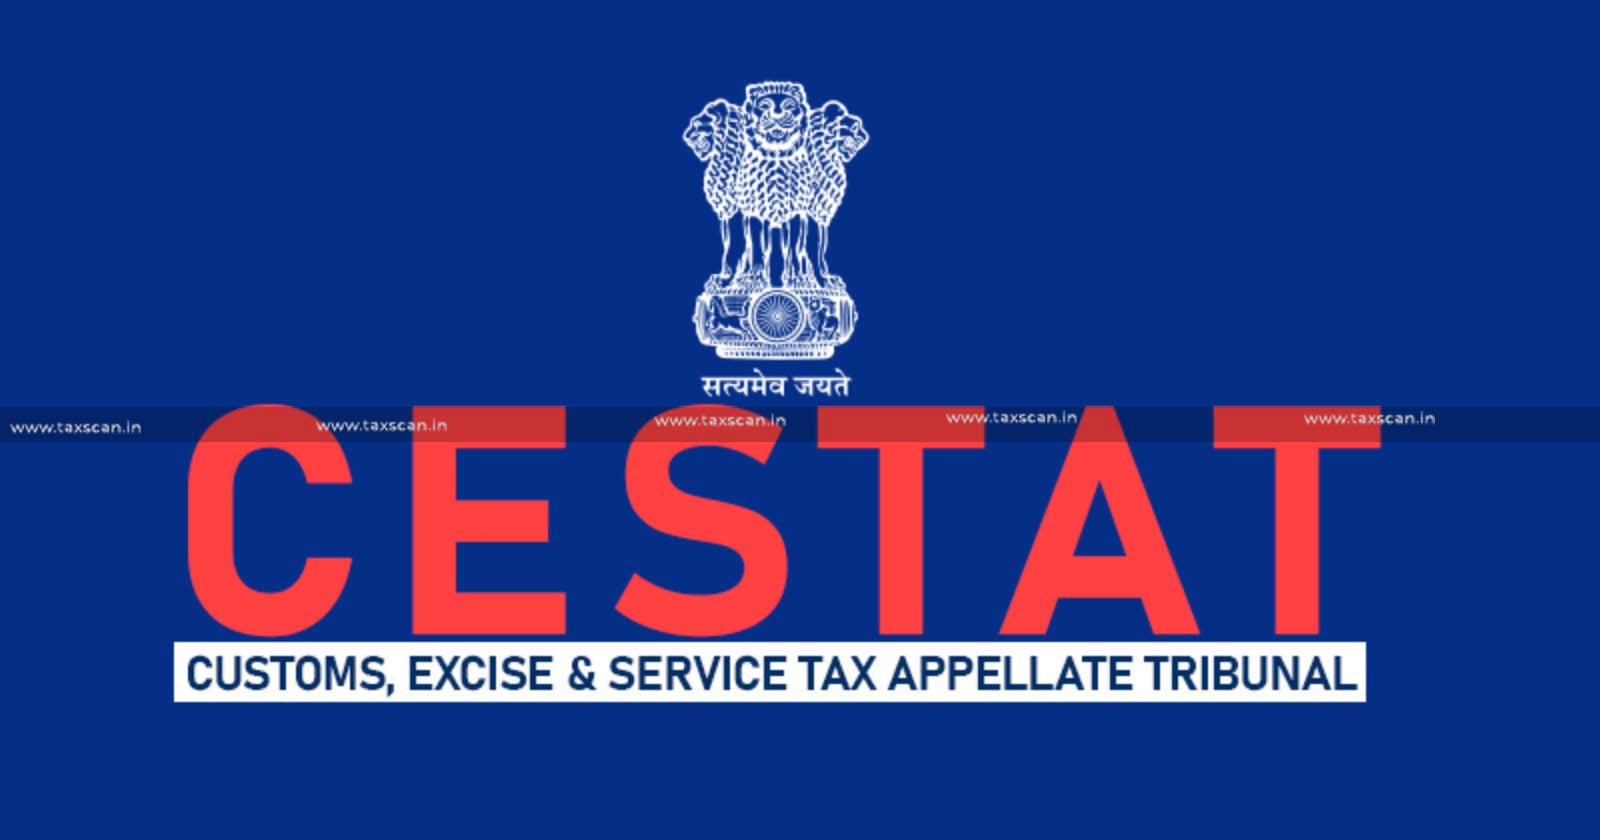 Central Excise Rules 2002 - CESTAT Orders Fresh Adjudication -Fresh Adjudication -Orders -CESTAT - taxscan